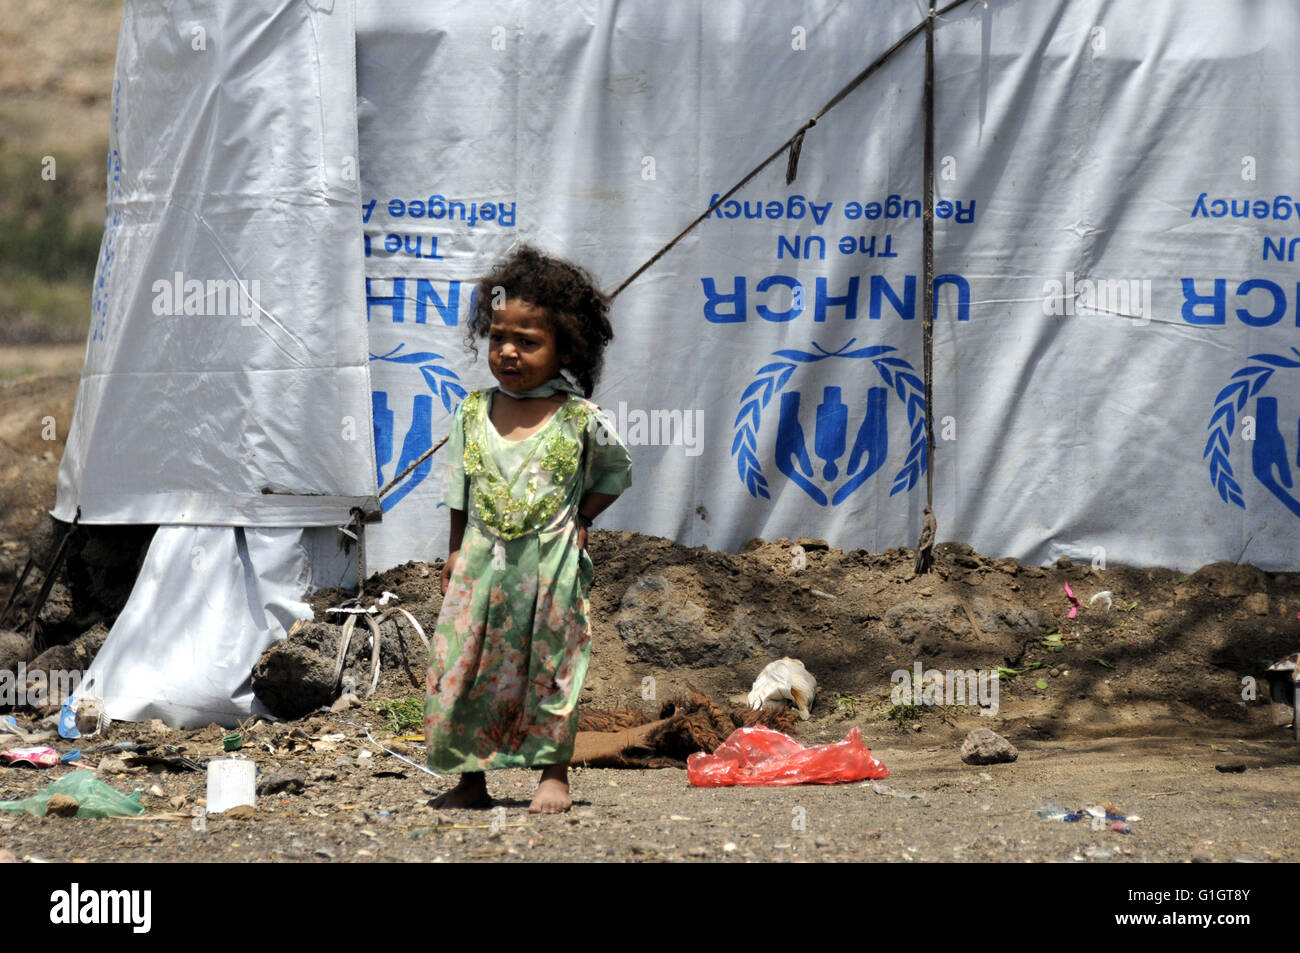 Sanaa, Yemen. 14th May, 2016. A Yemeni internally displaced child stands outside her makeshift shelter at a camp on the outskirts of Amran province, Yemen, on May 14, 2016. The ongoing conflict in Yemen has forcibly displaced more than 2.4 million people in Yemen. © Hani Ali/Xinhua/Alamy Live News Stock Photo